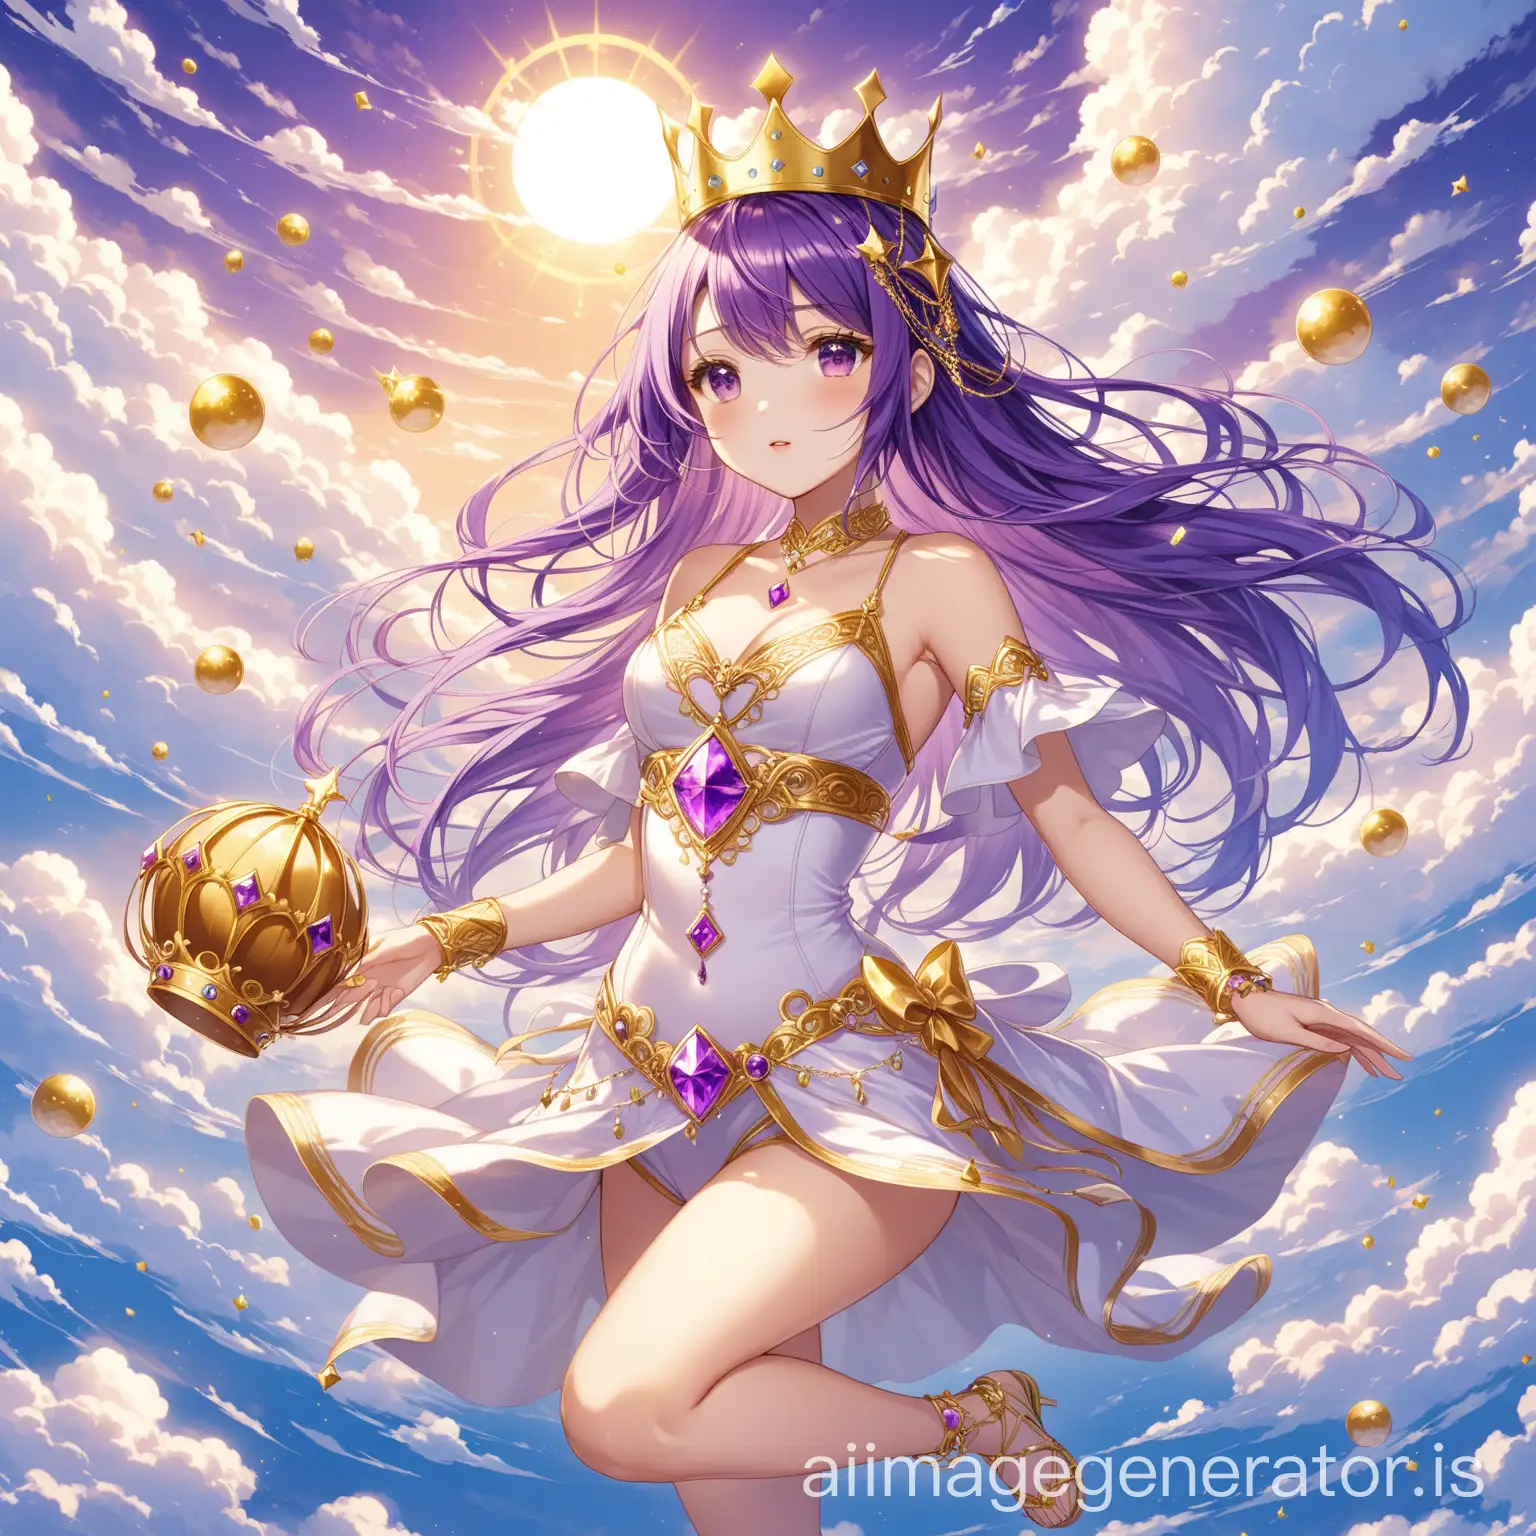 anime girl goddess purple hair golden crown and accesories floating in the clouds